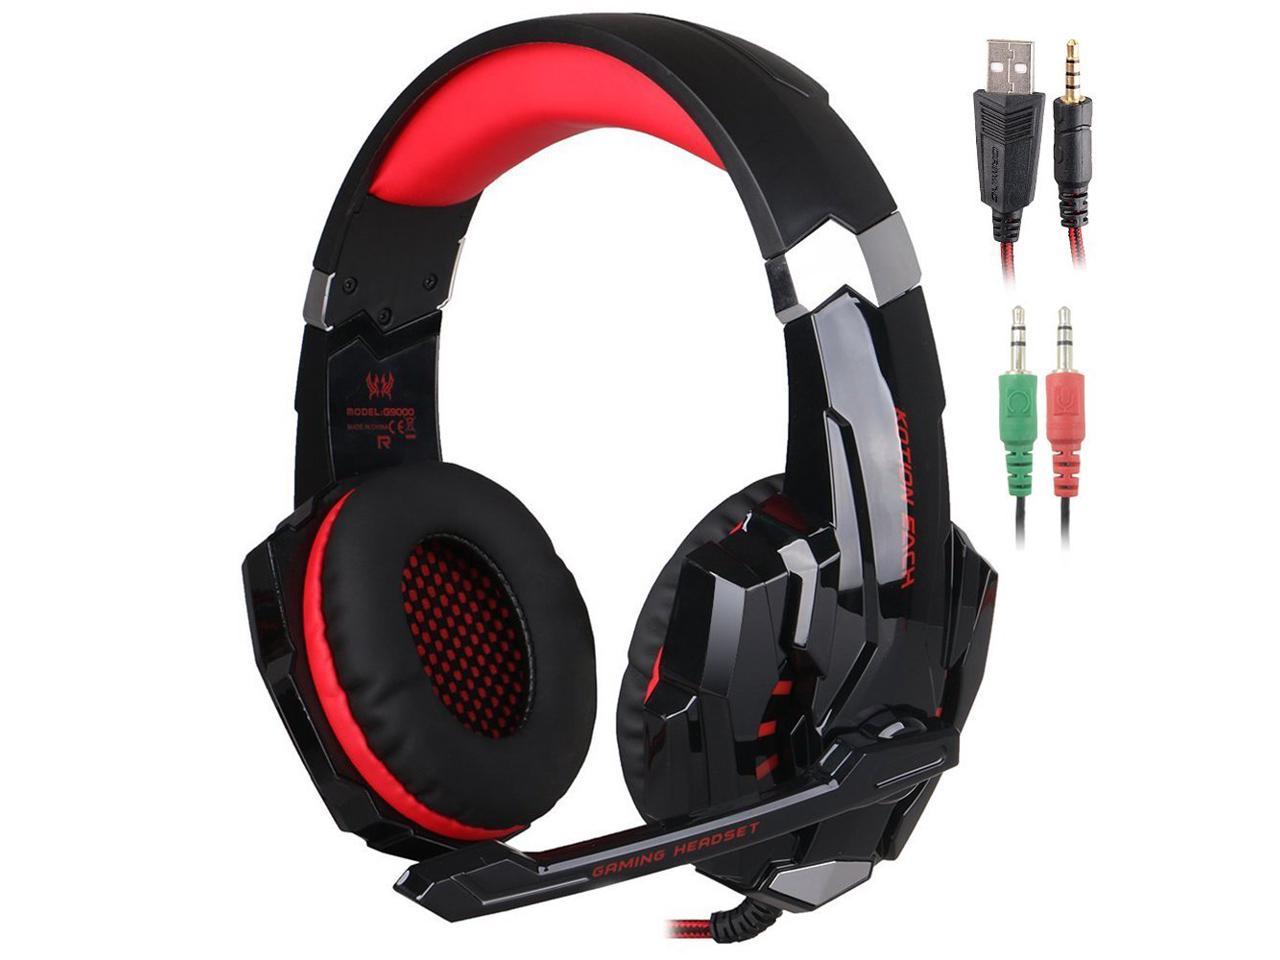 3.5mm GAMING HEADSET CUFFIE MIC LED per PC Laptop PS4 Slim Pro Xbox One X S 